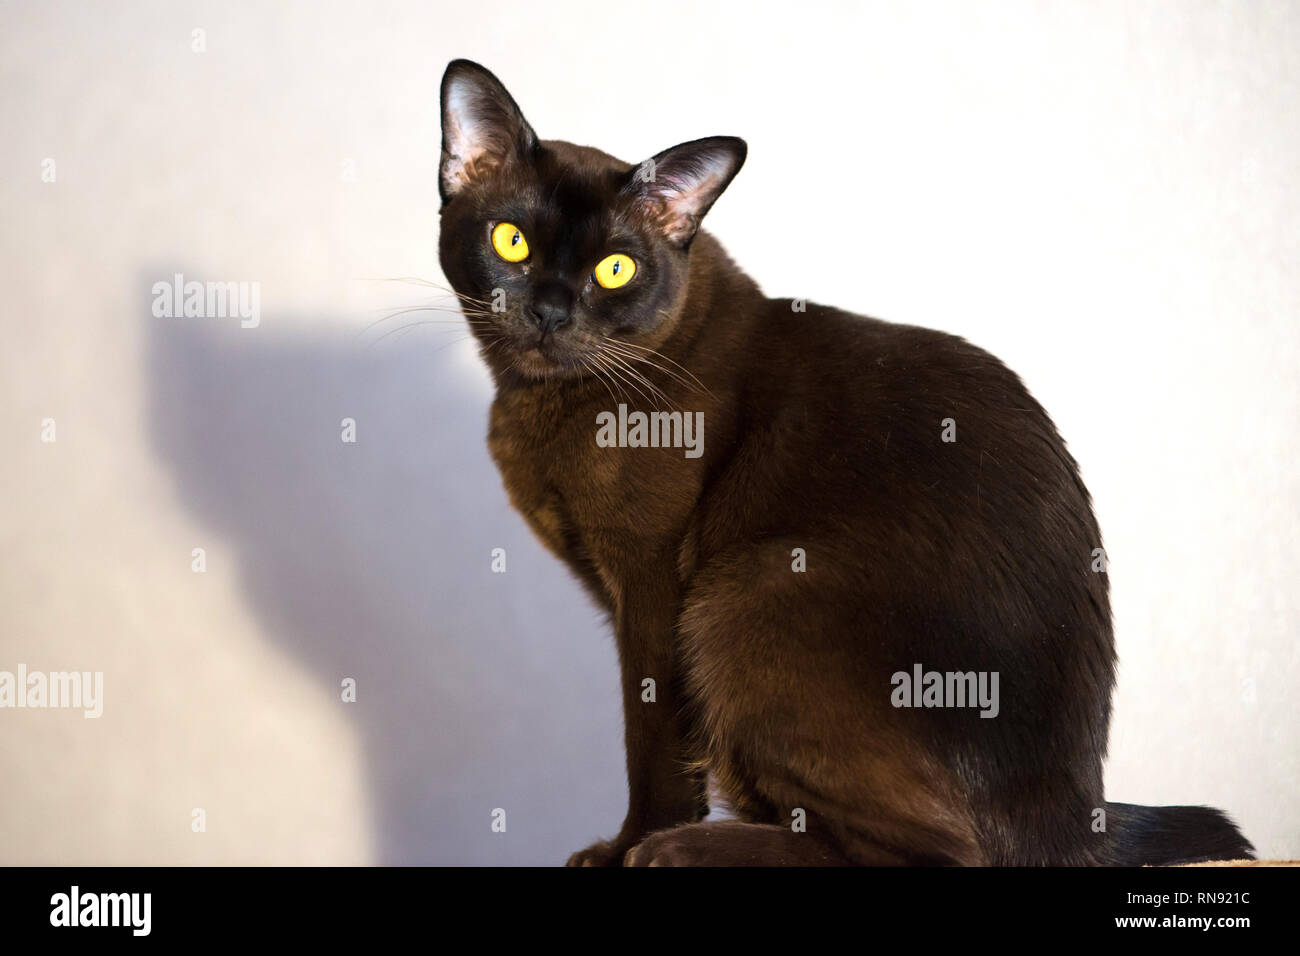 Brown Burmese Cat with Chocolate fur color and yellow eyes, Curious Looking Stock Photo